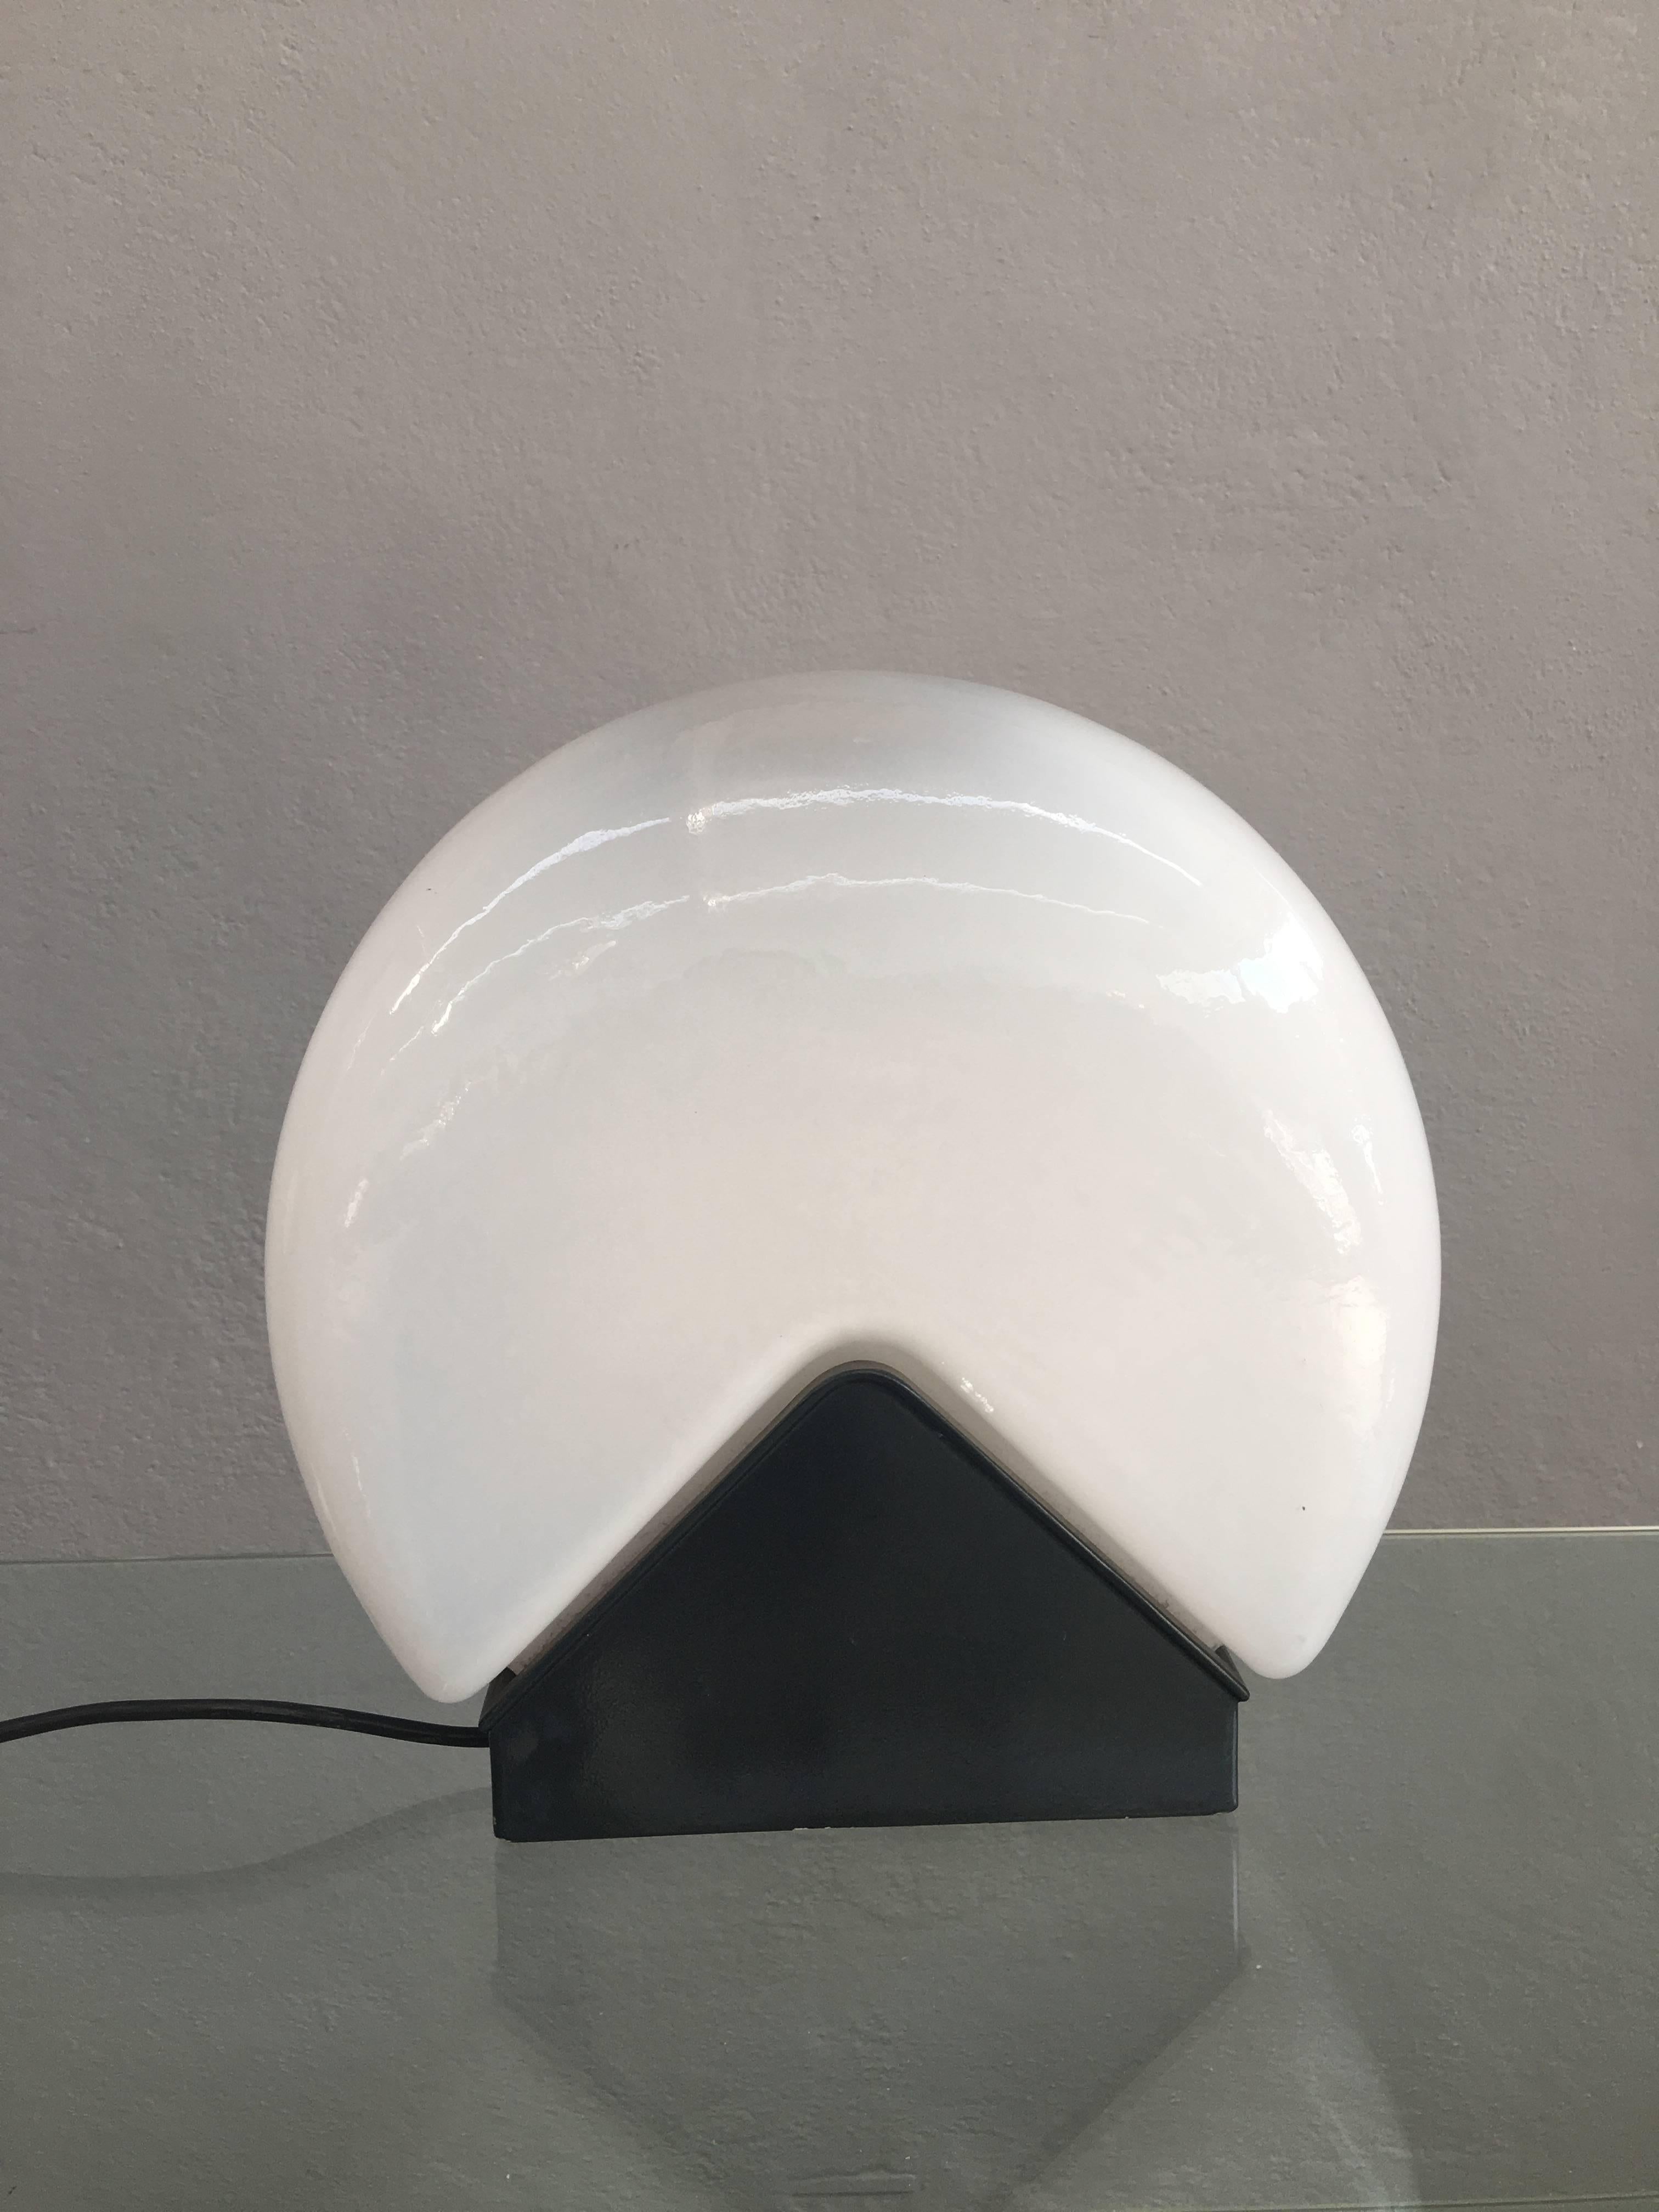 Stunning white Murano glass with black metal base with two lights.
Designed by Roberto Pamio for Leucos. 